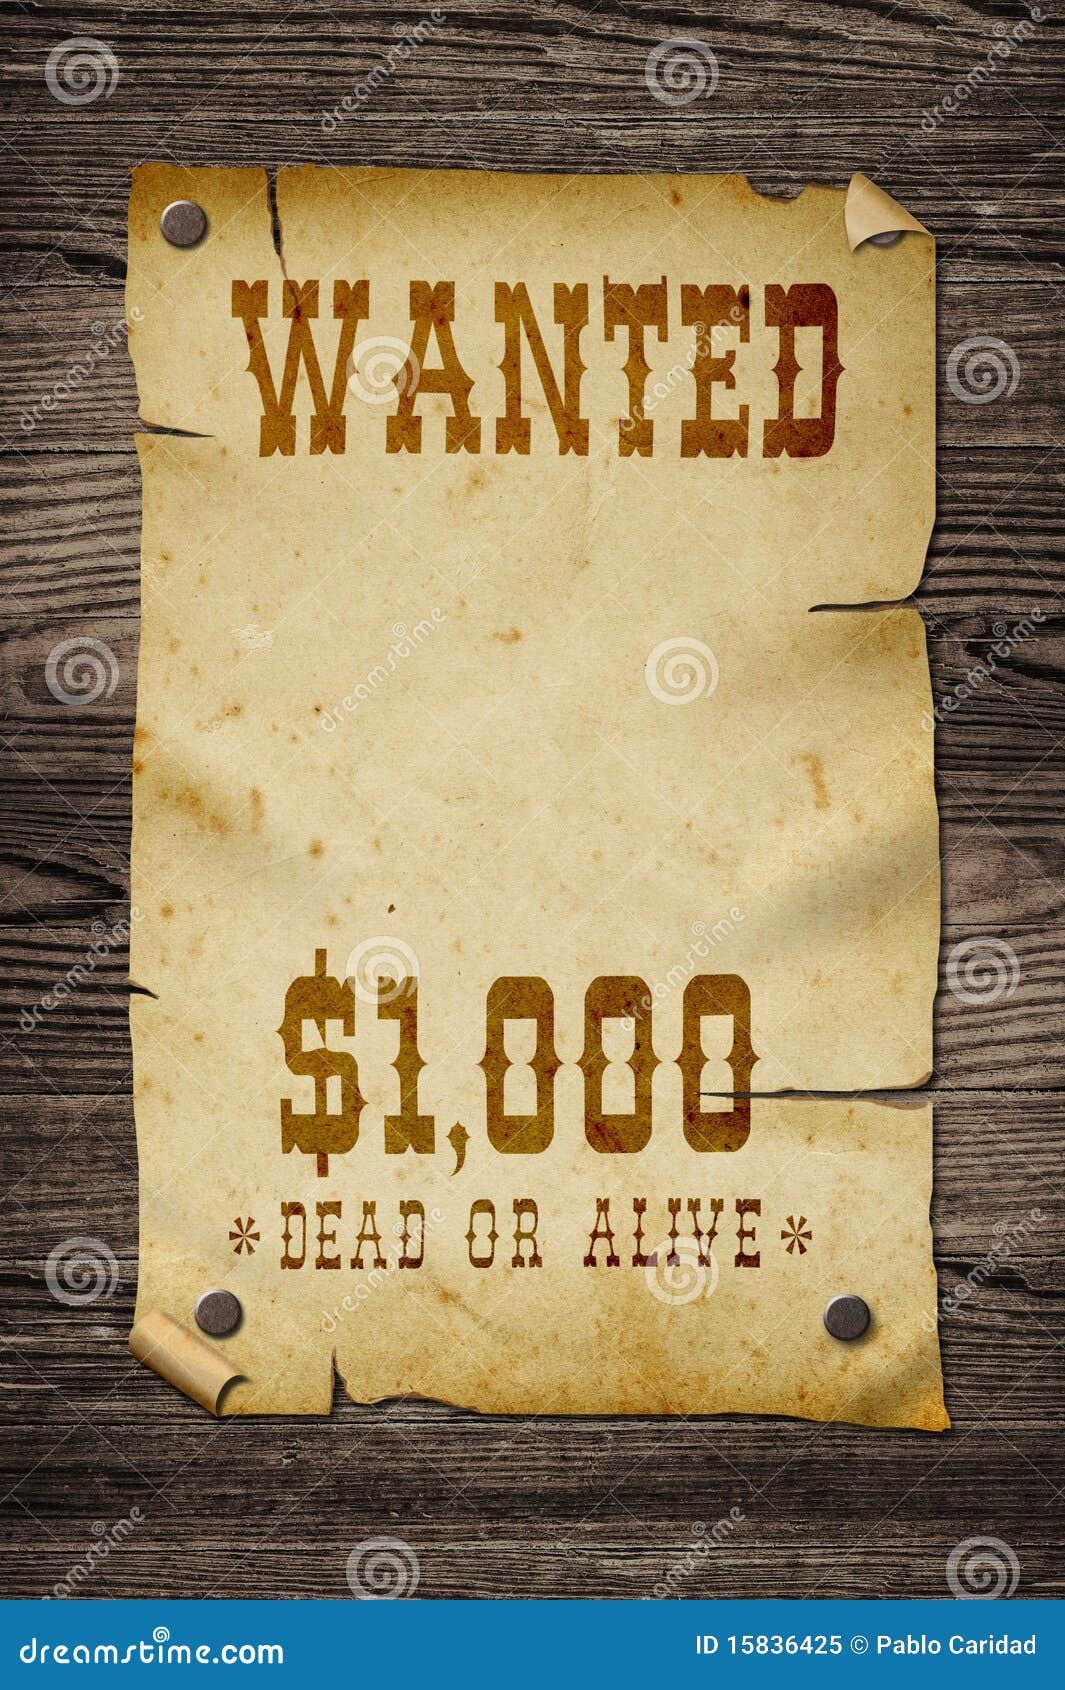 Old wanted sign. stock image. Image of aged, wallpaper - 15836425